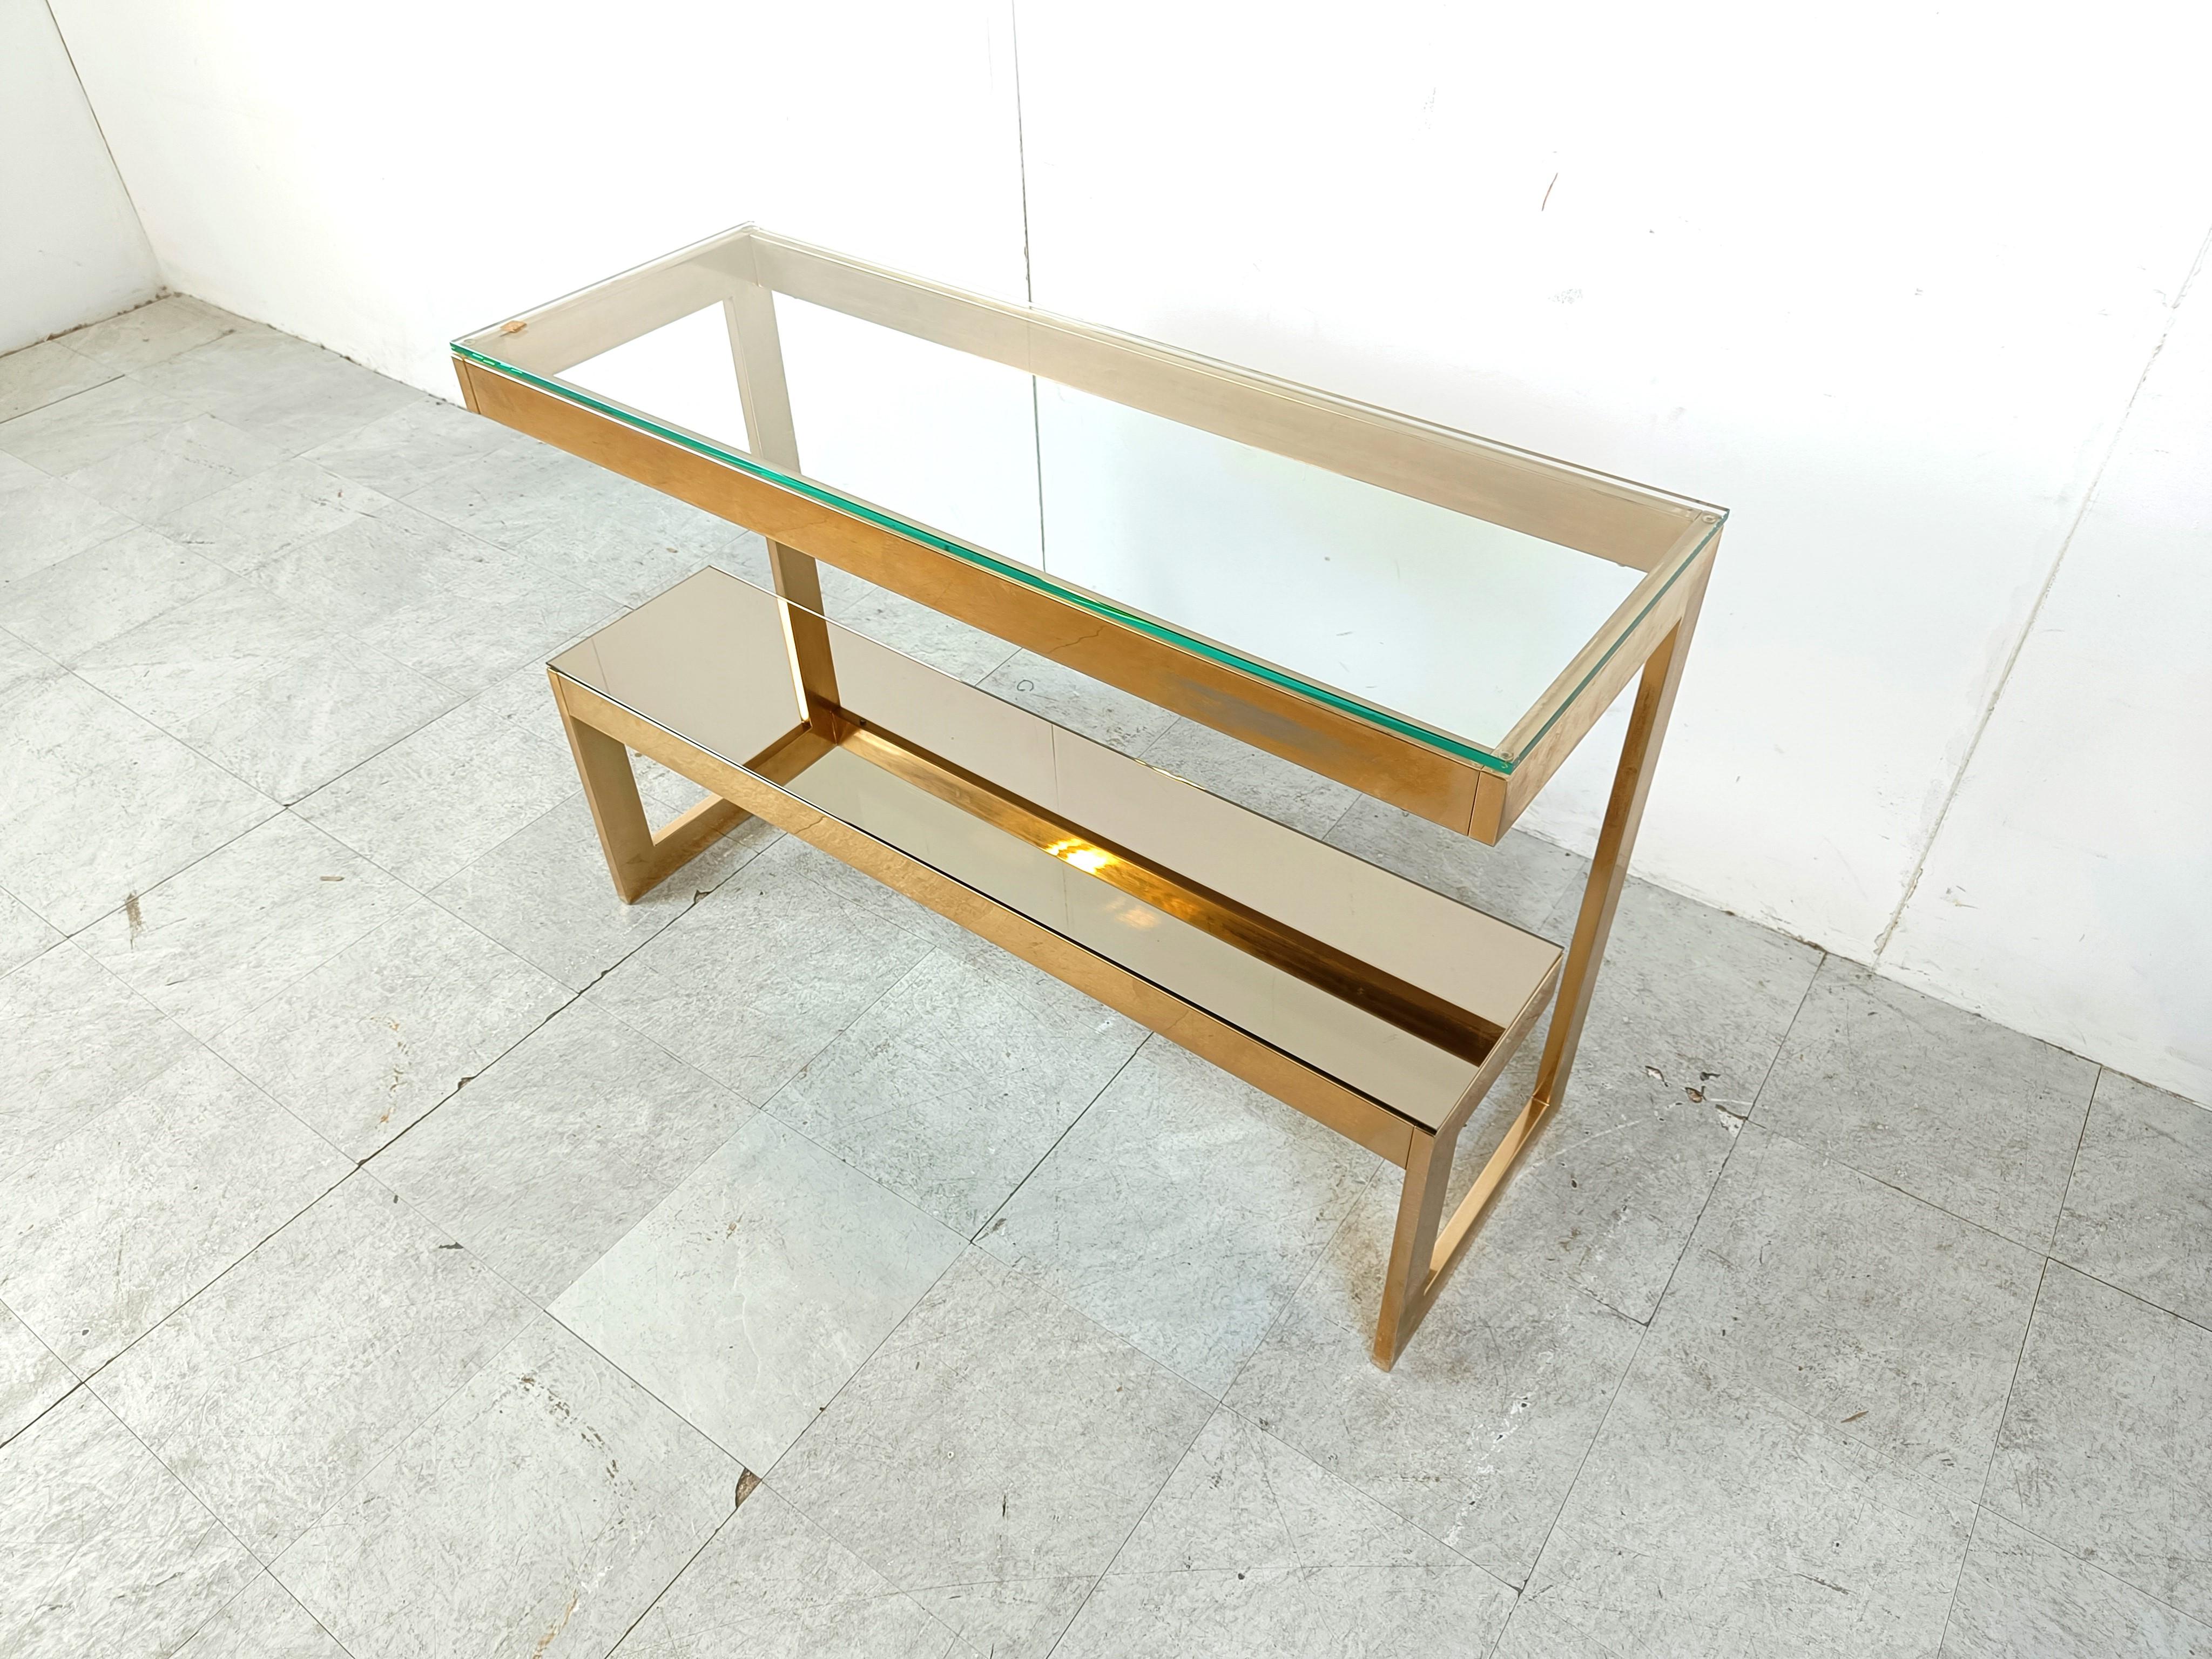 23kt gold layered 'G'-shaped console table produced by Belgochrom.

The table has mirrored and clear glass tops

Good vintage condition with normal age related wear. New glass.

1970s - Belgium

Height: 75cm
Width: 110cm
Depth: 40cm

Ref.: 354444